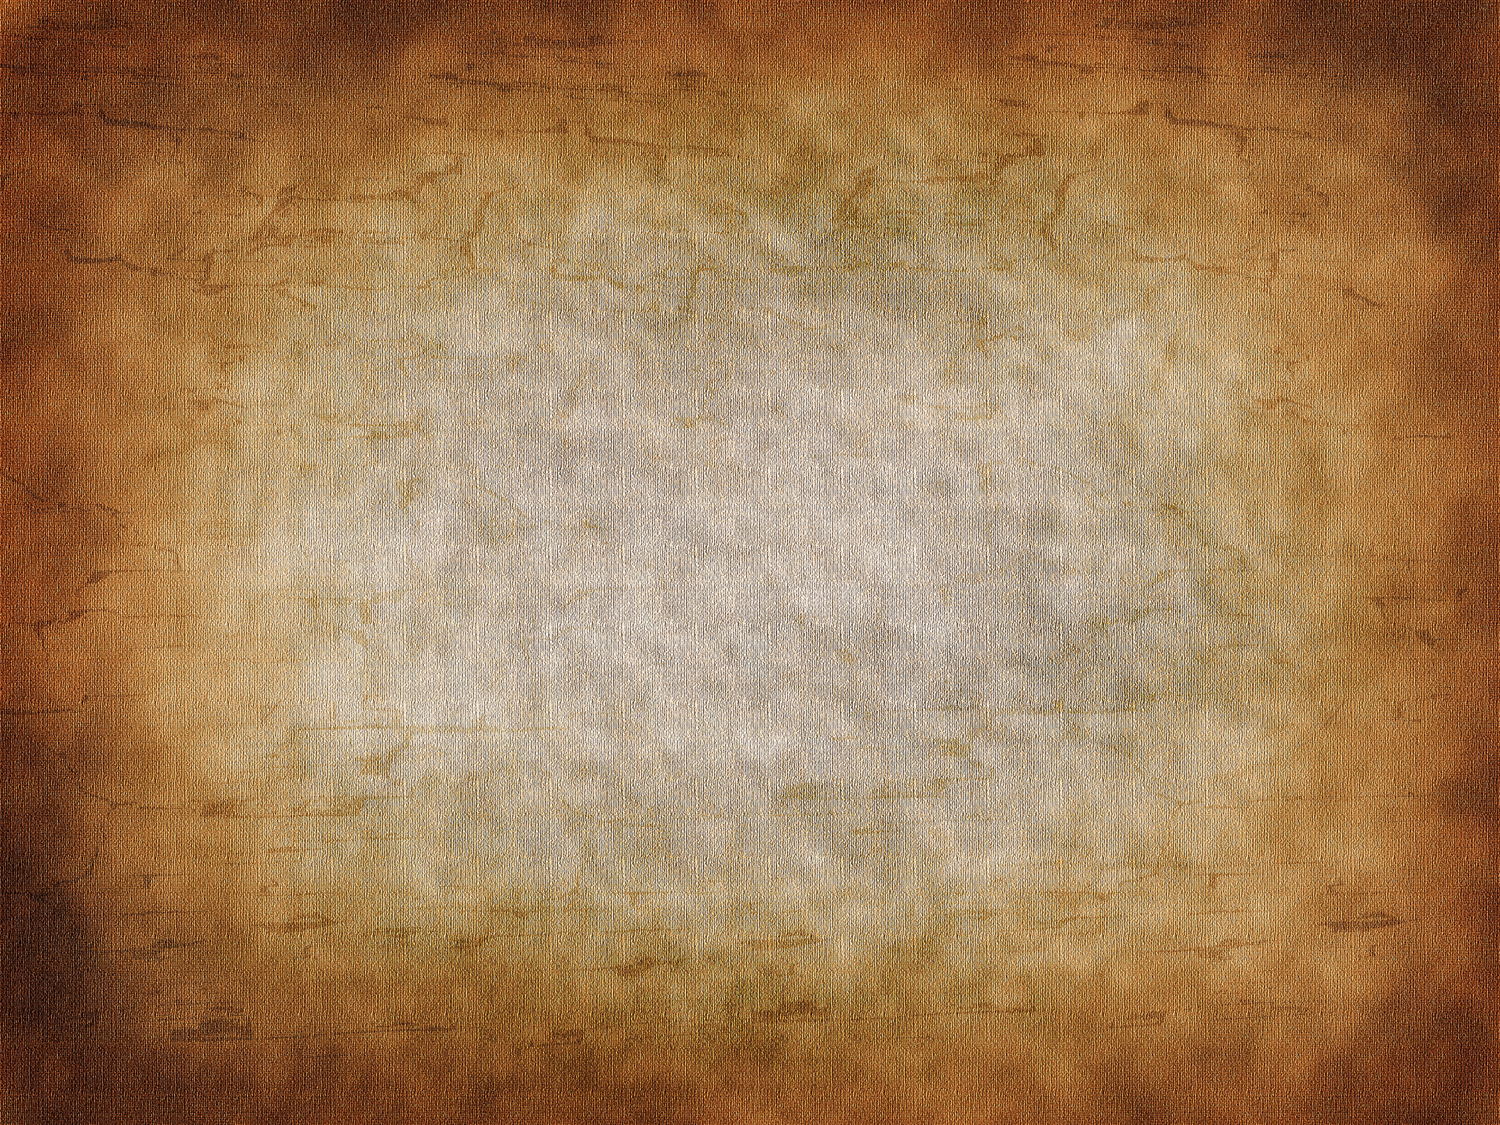 Burnt Grunge Paper Texture Background With An Old West Feel